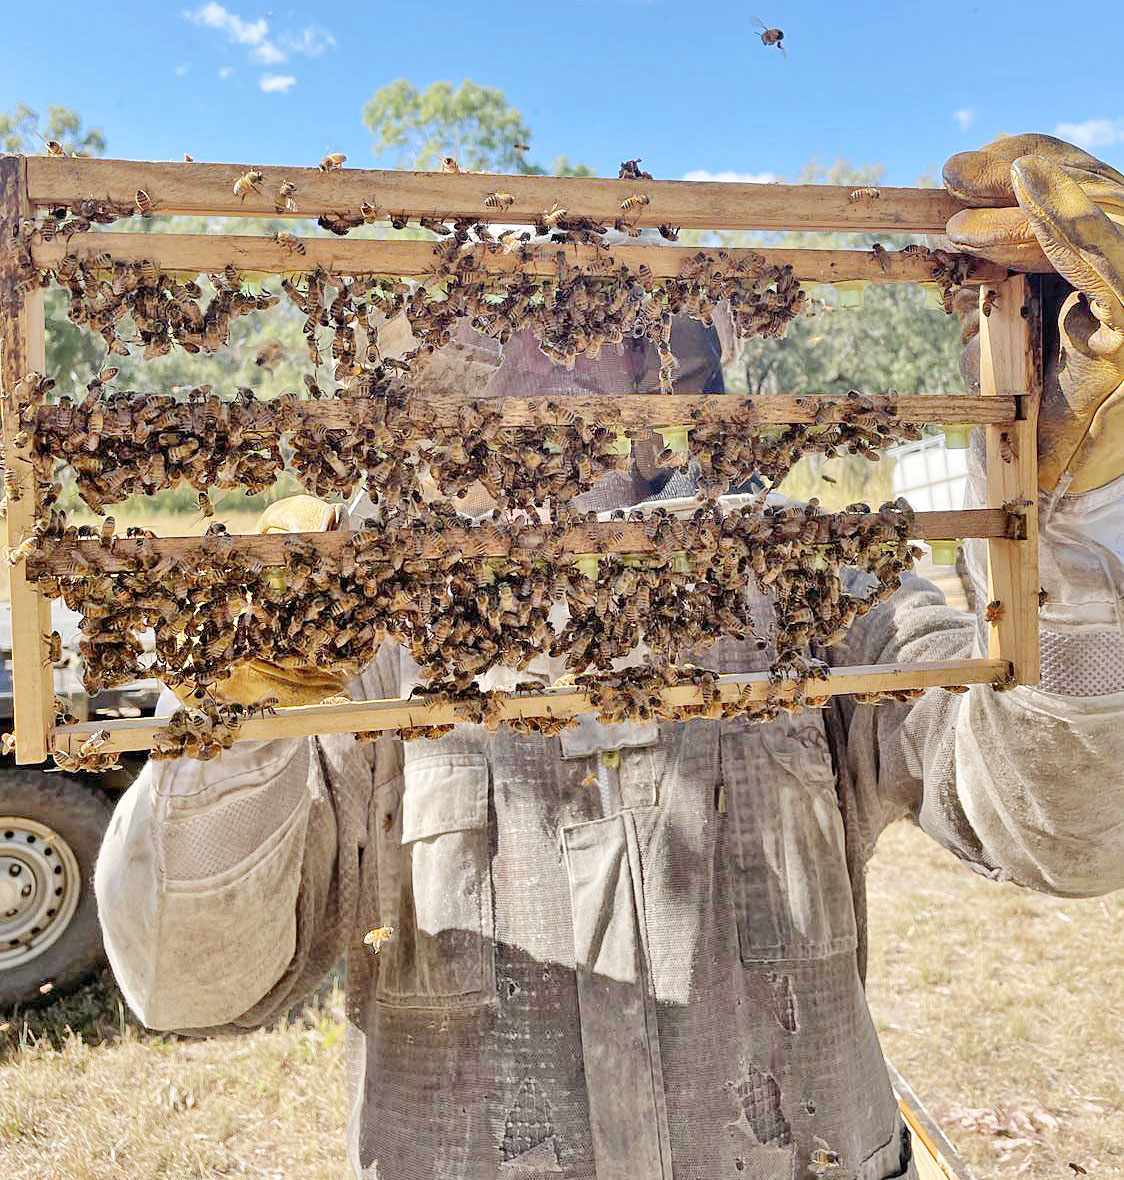 Jack Laughton loves the science behind beekeeping, which has helped him grow his business to 800 hives.